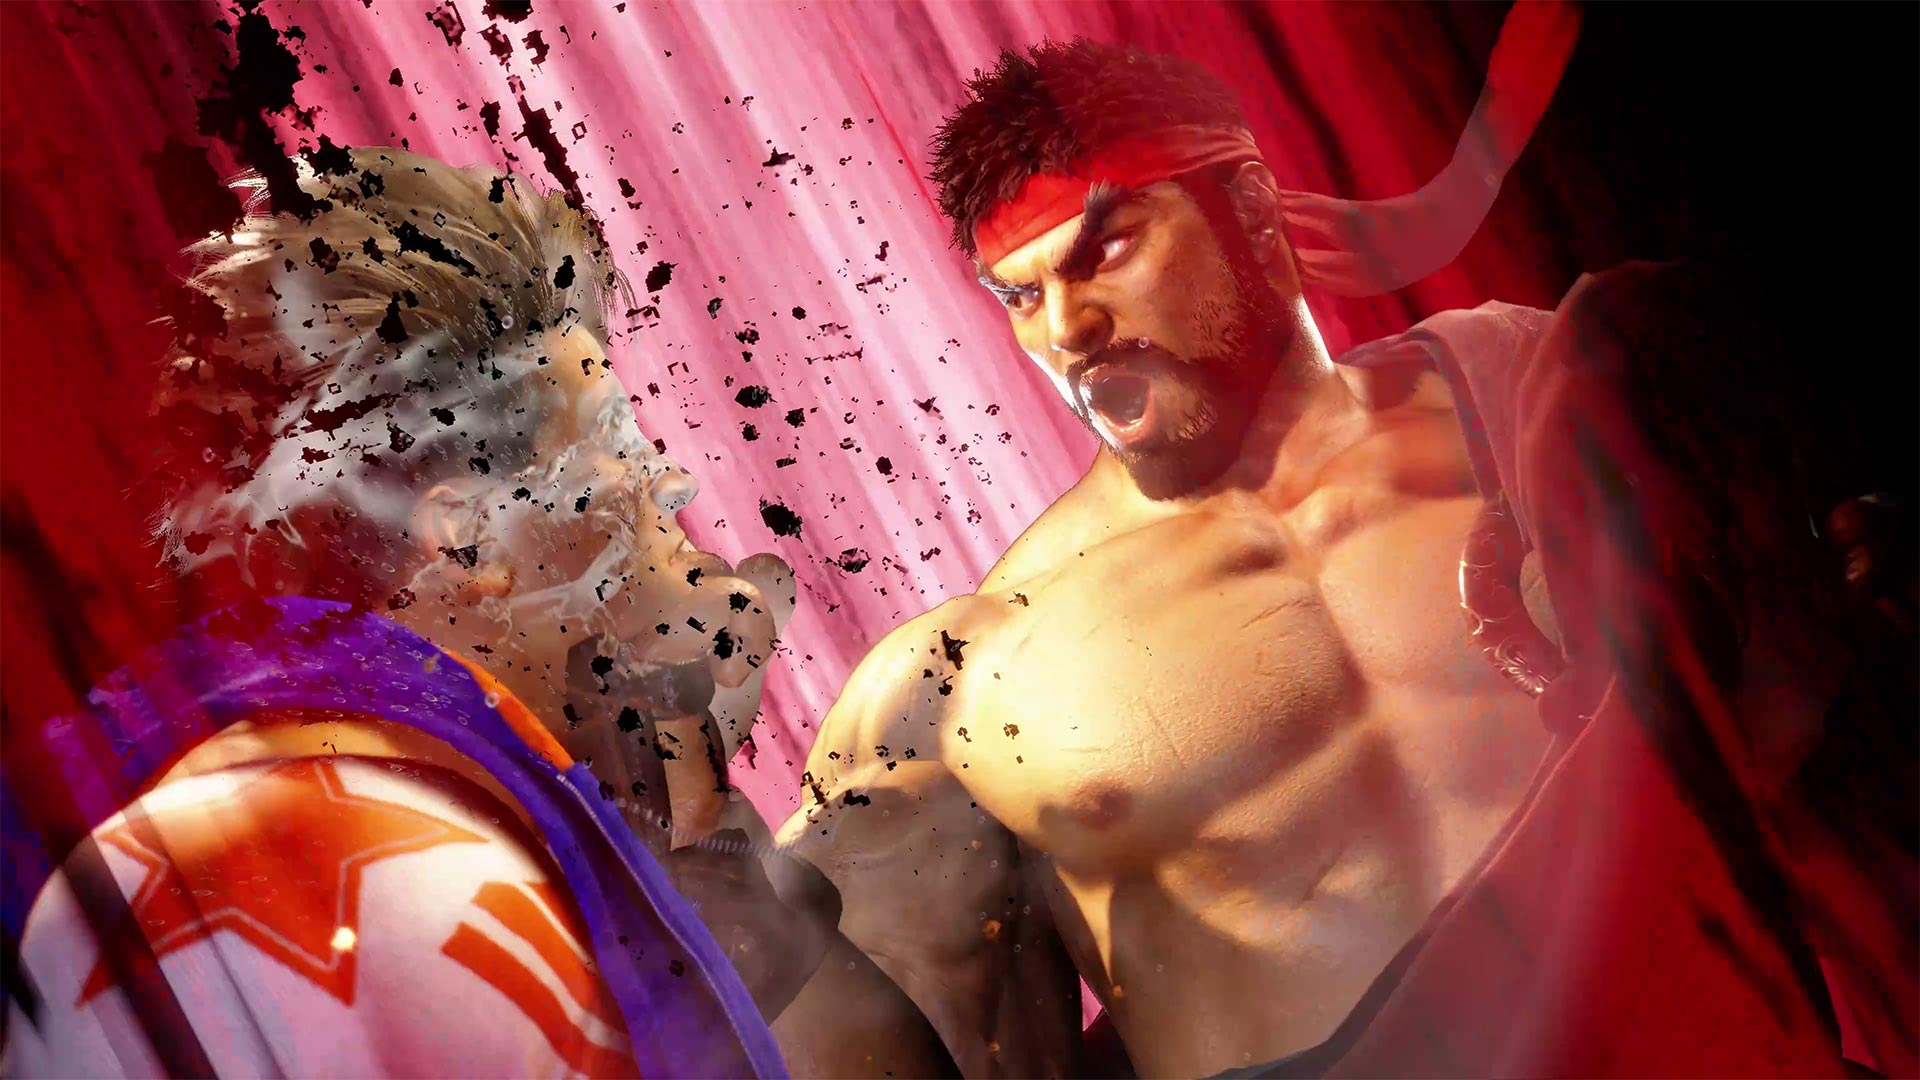 Games To Play Now That Street Fighter 6's Beta Is Over